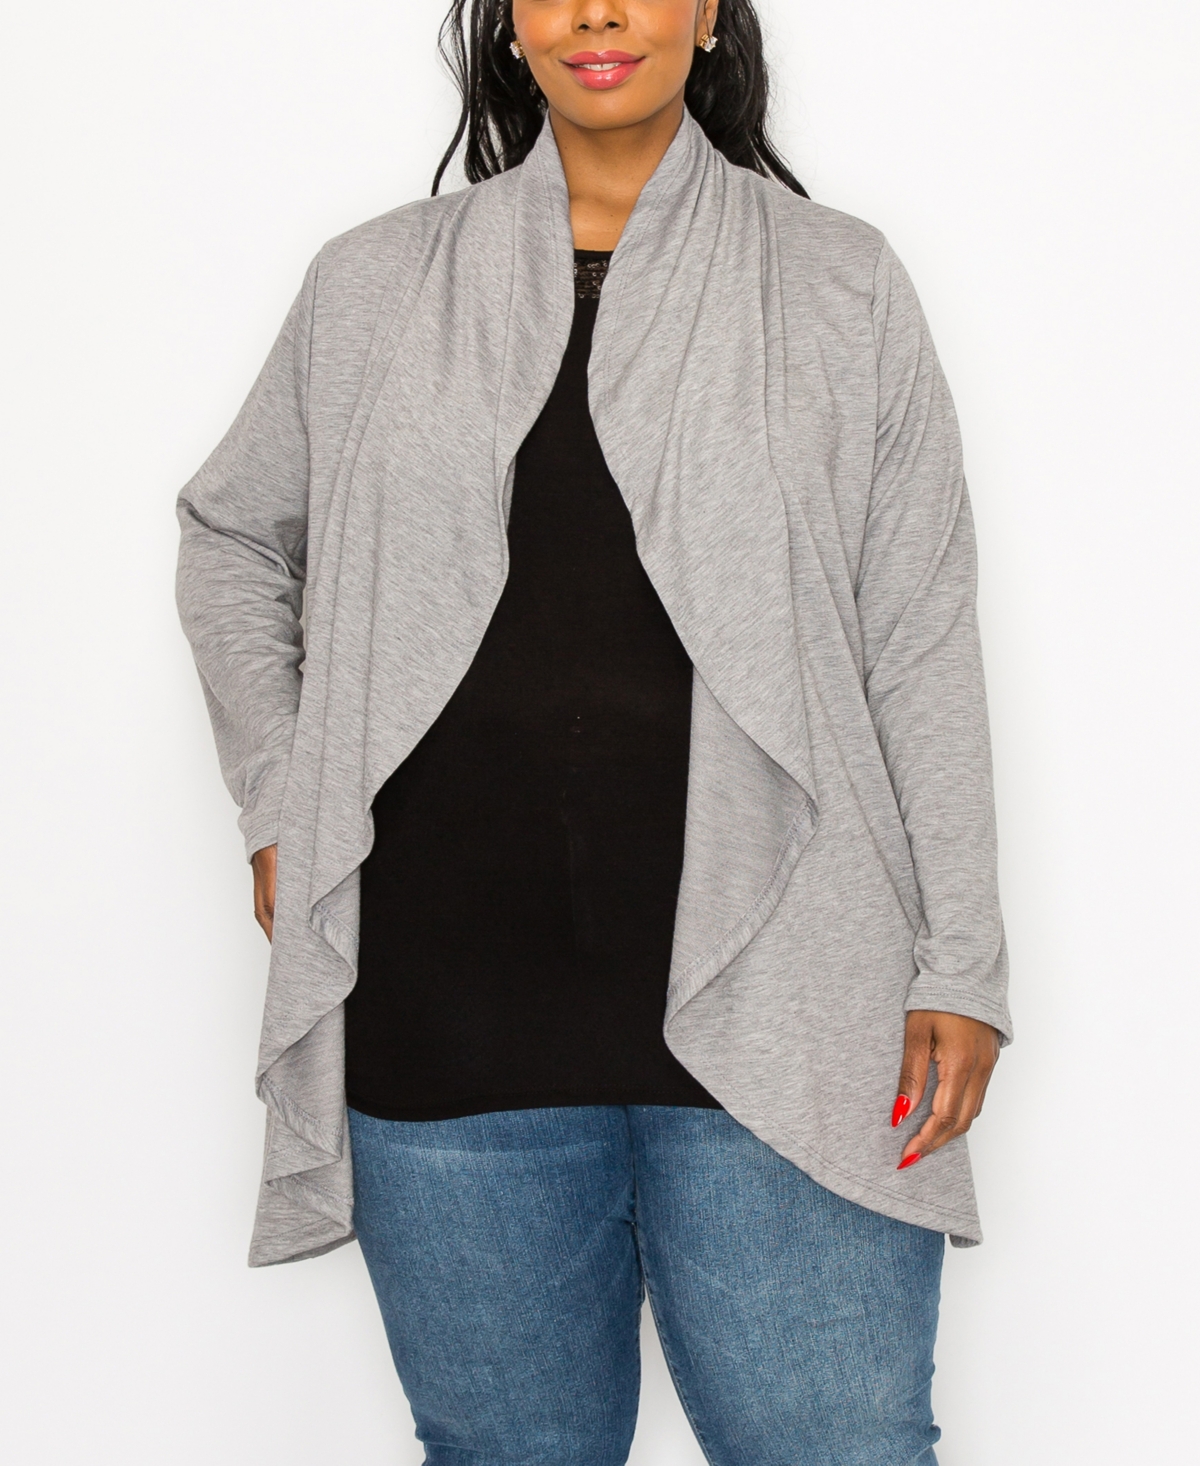 Coin 1804 Plus Size Draped Flyaway Cardigan Duster Knit Top In Heather Gray